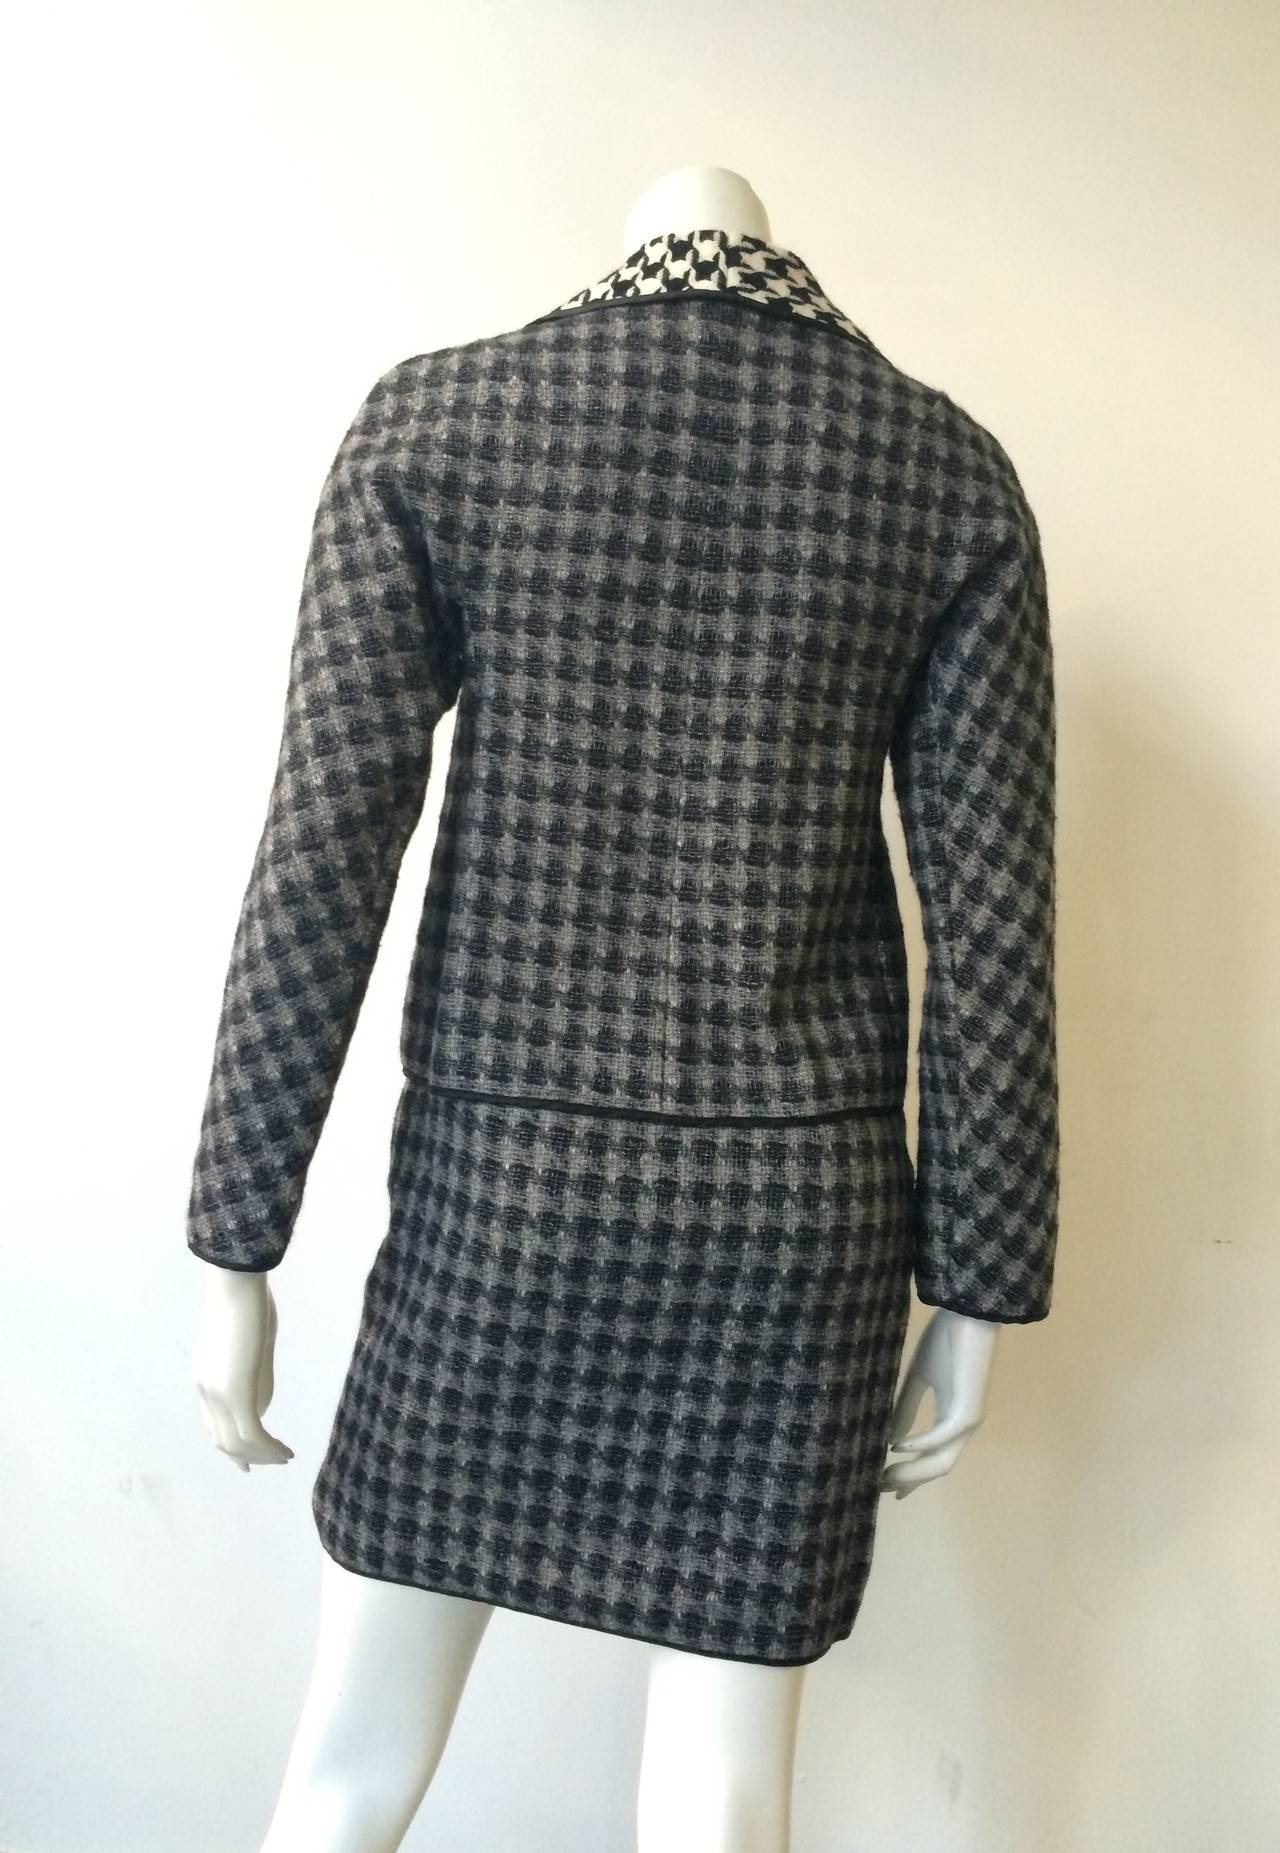 Moschino houndstooth wool jacket & skirt size 6 but see measurements. Made in Italy and named after Franco Moschino Mr Fashion Rebel himself who's wacky, imaginative designs never failed to entertain. 
Measurements for jacket :
Shoulder to